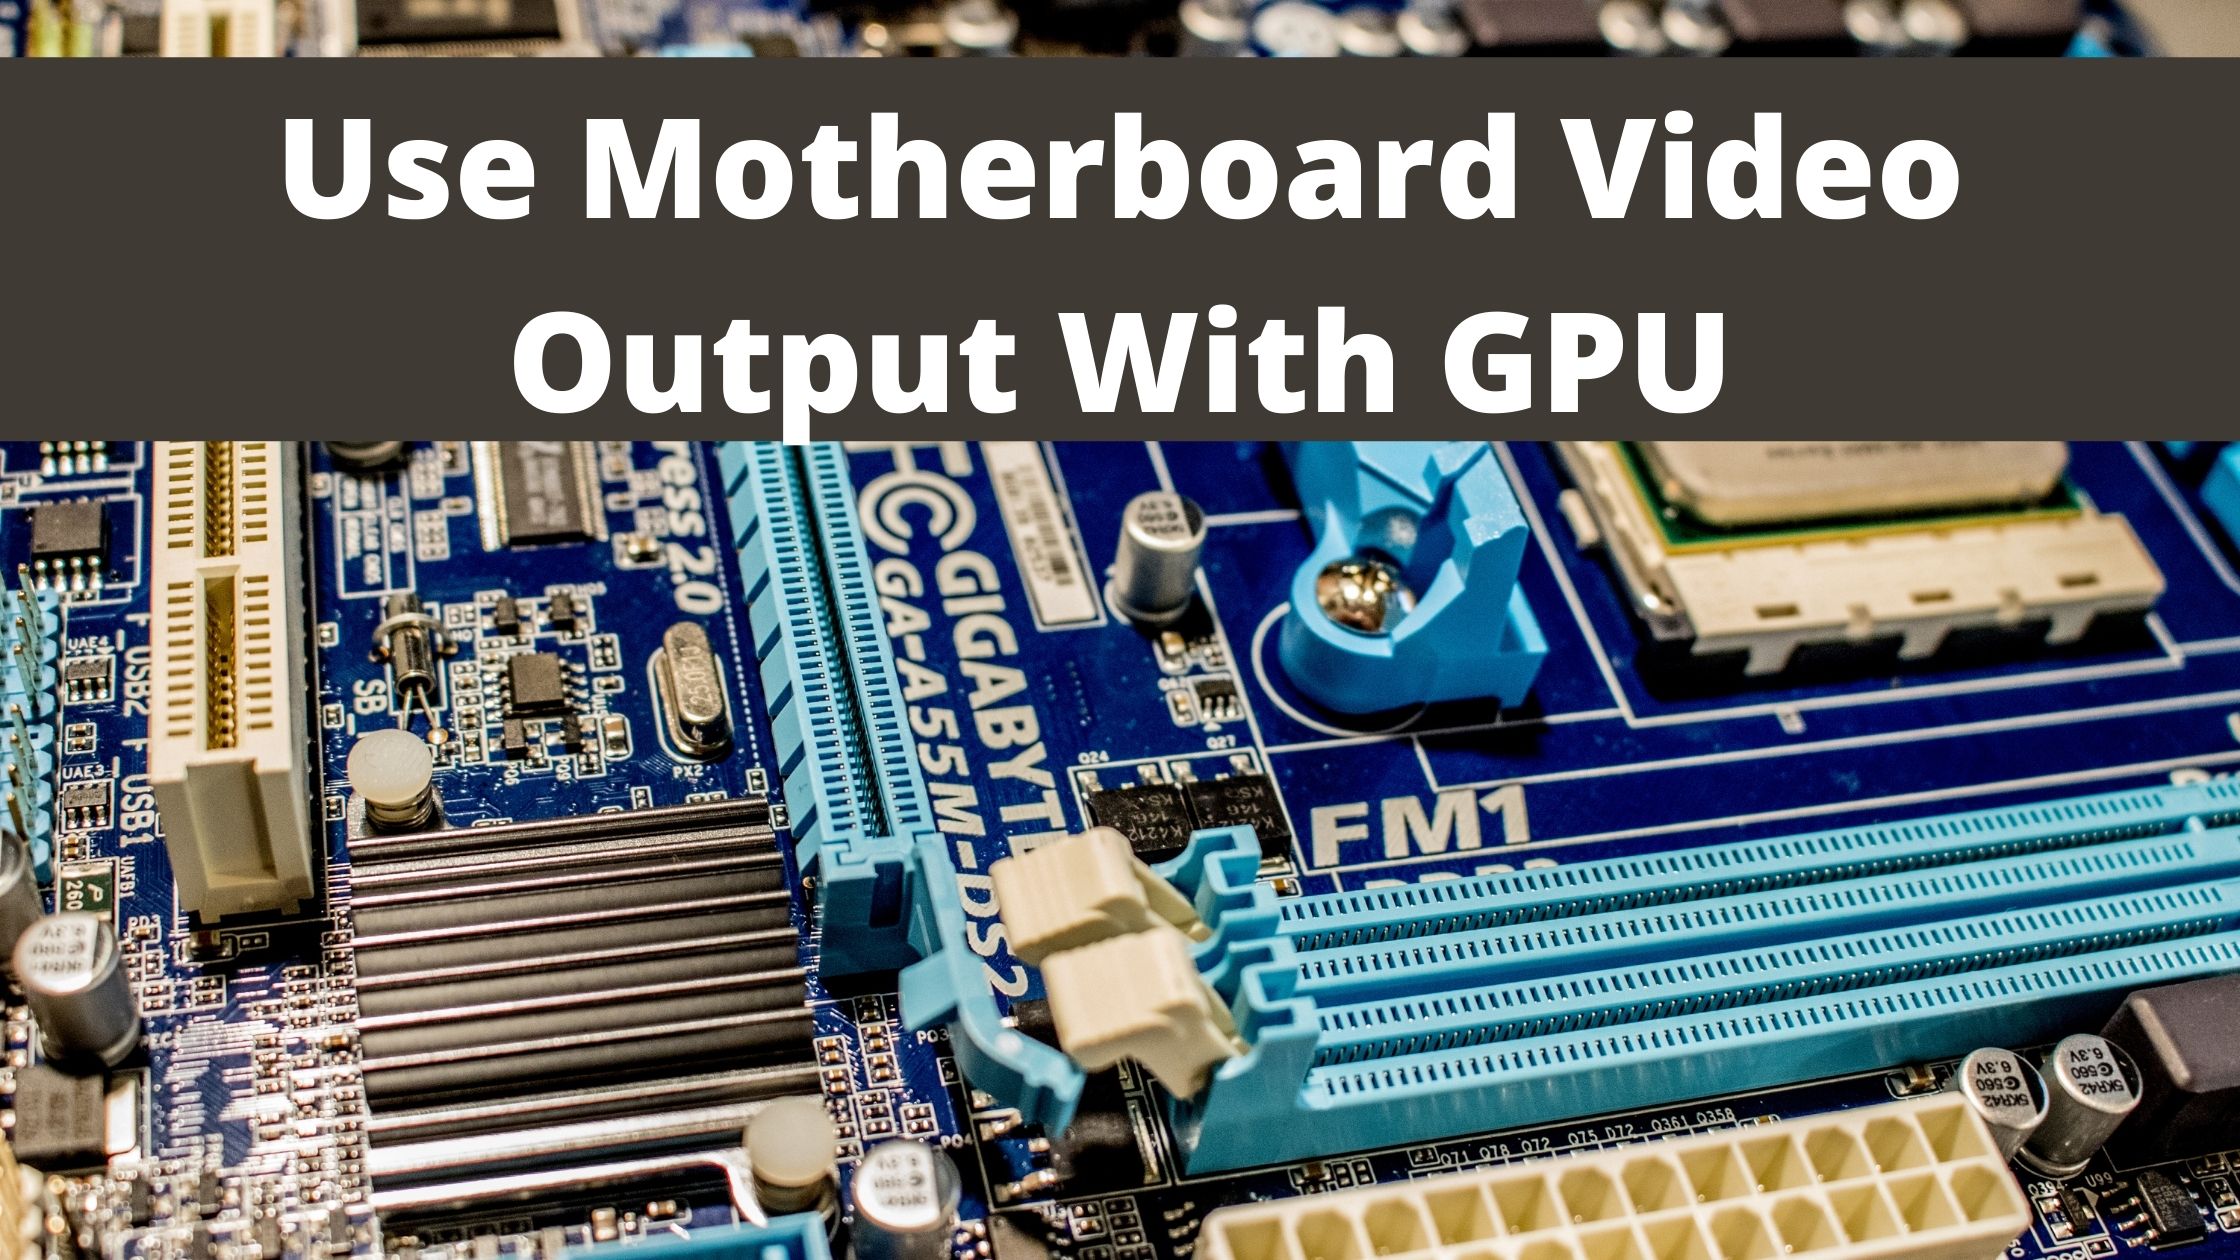 Use Motherboard Video Output With GPU